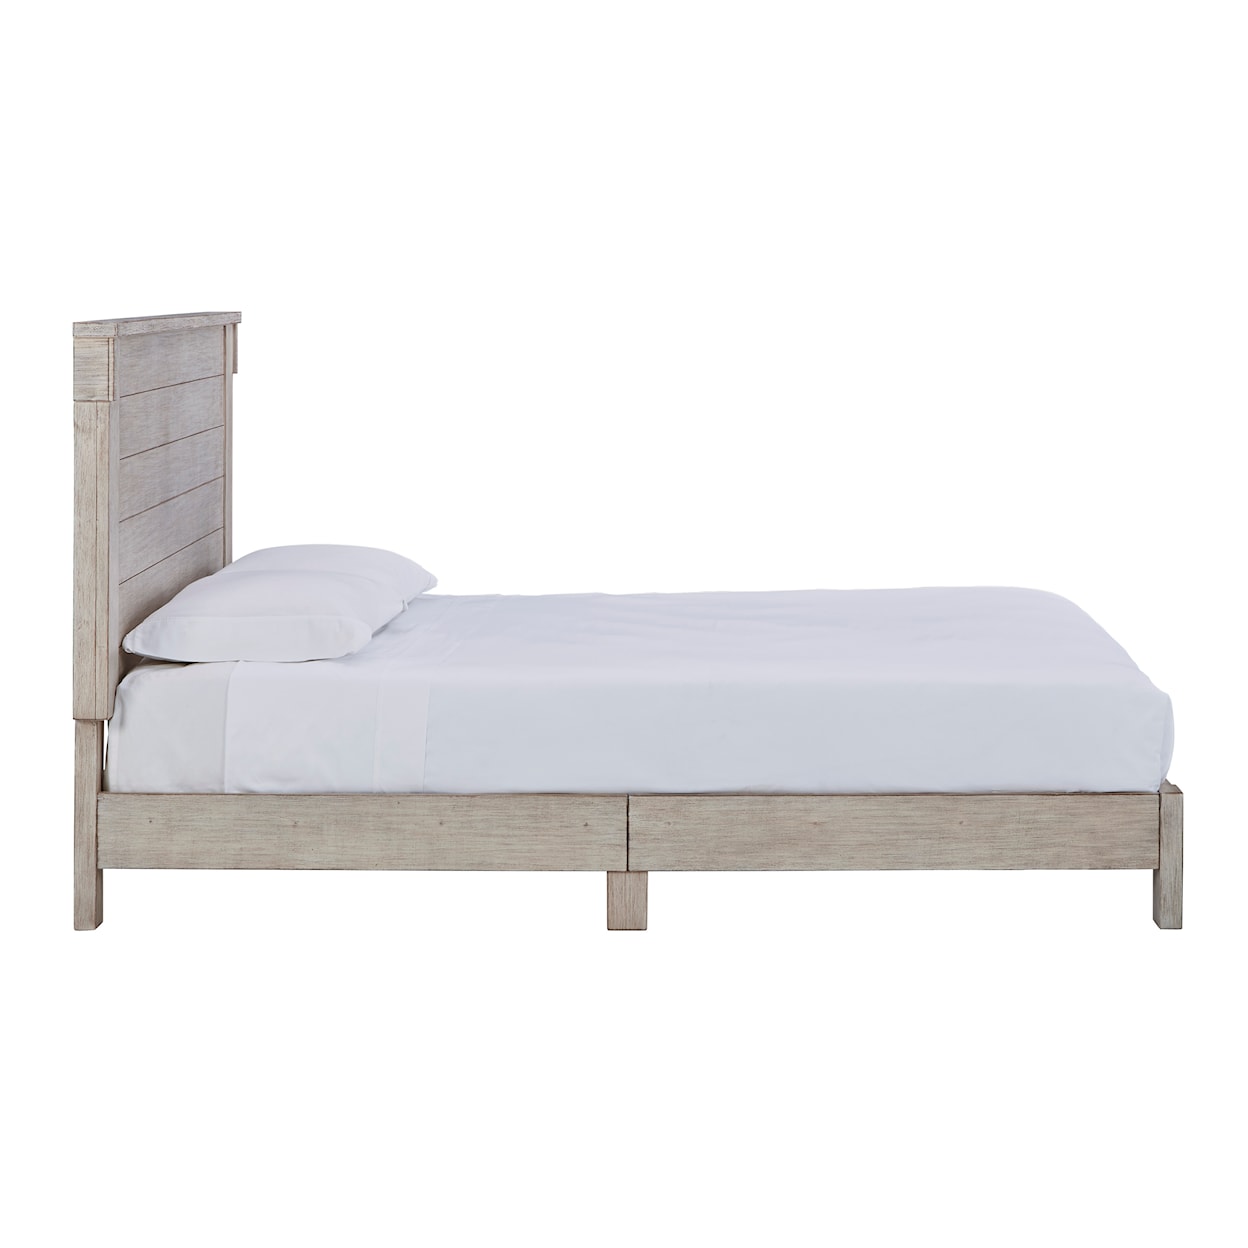 Signature Design by Ashley Hollentown King Panel Bed